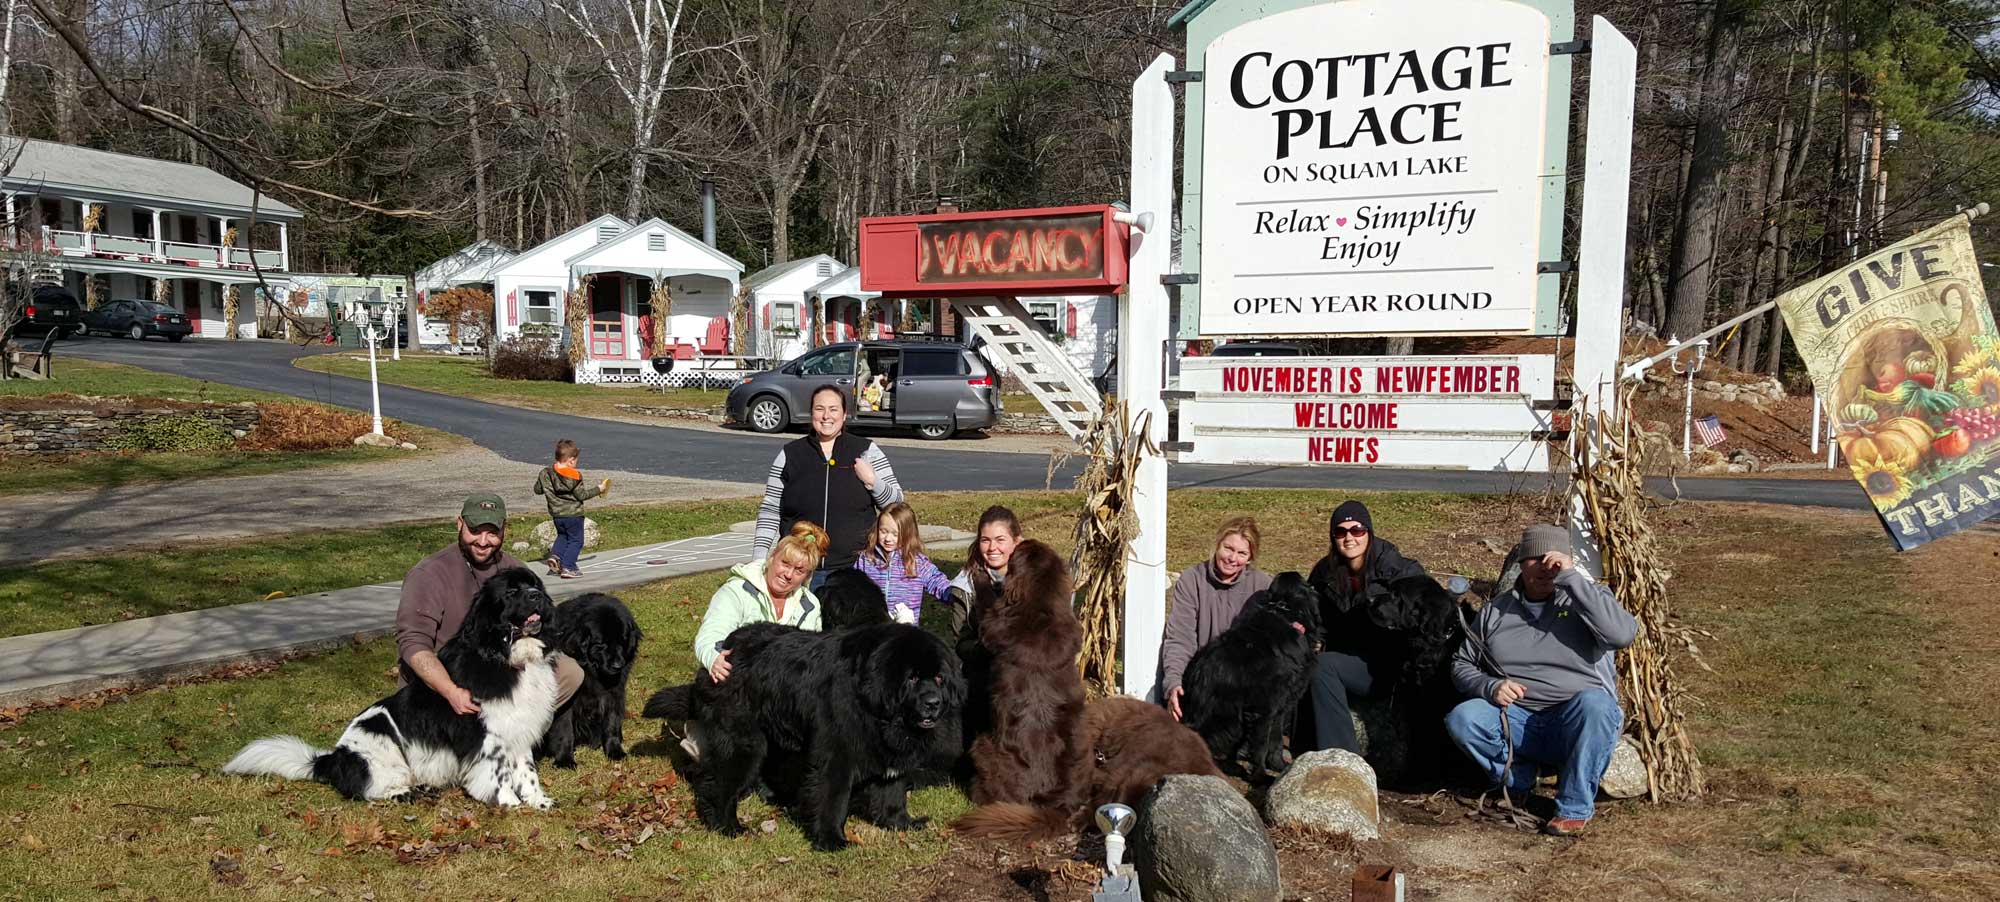 Newfies-at-the-sign